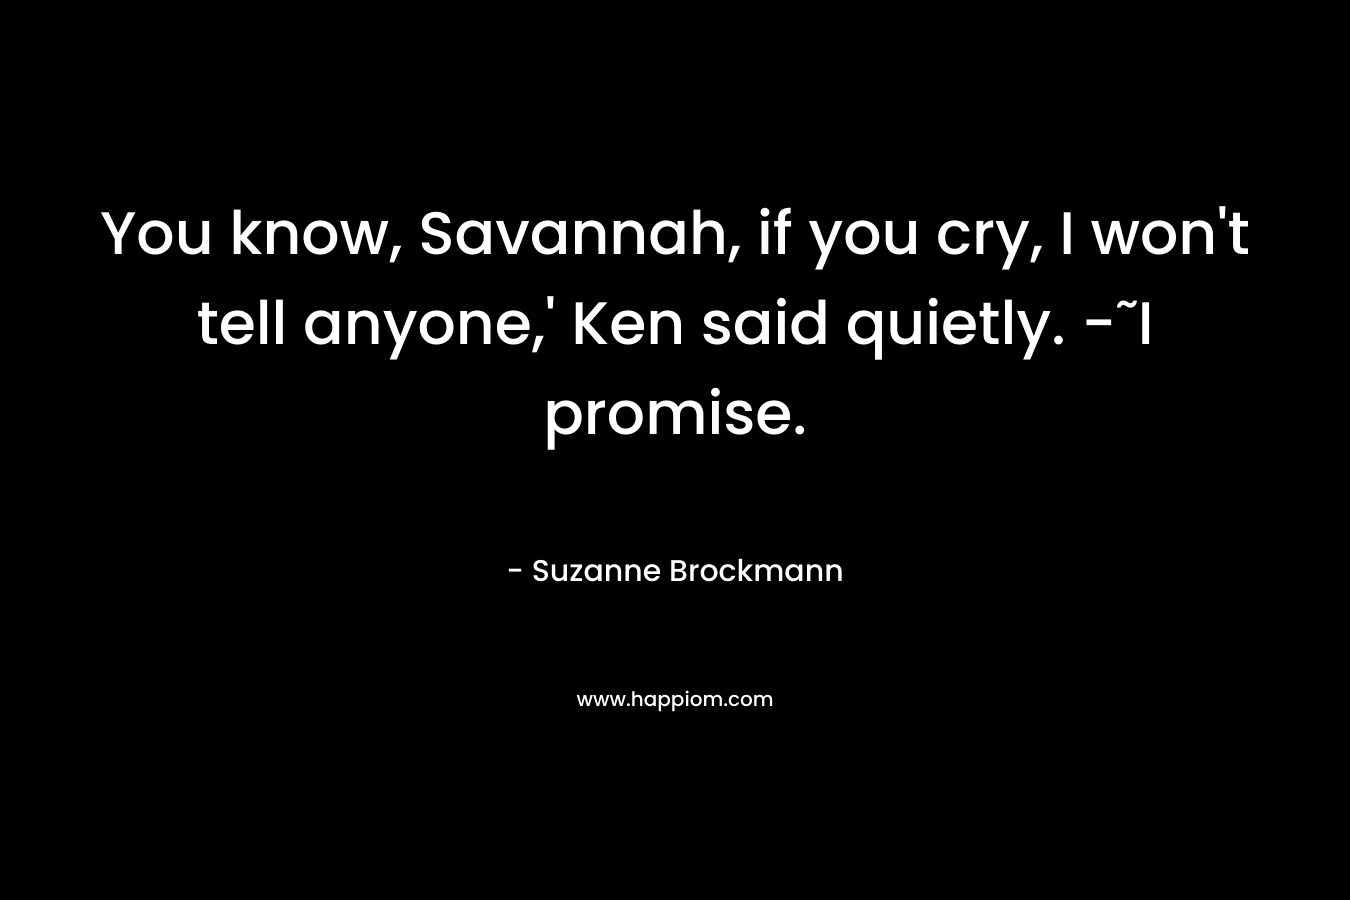 You know, Savannah, if you cry, I won't tell anyone,' Ken said quietly. -˜I promise.